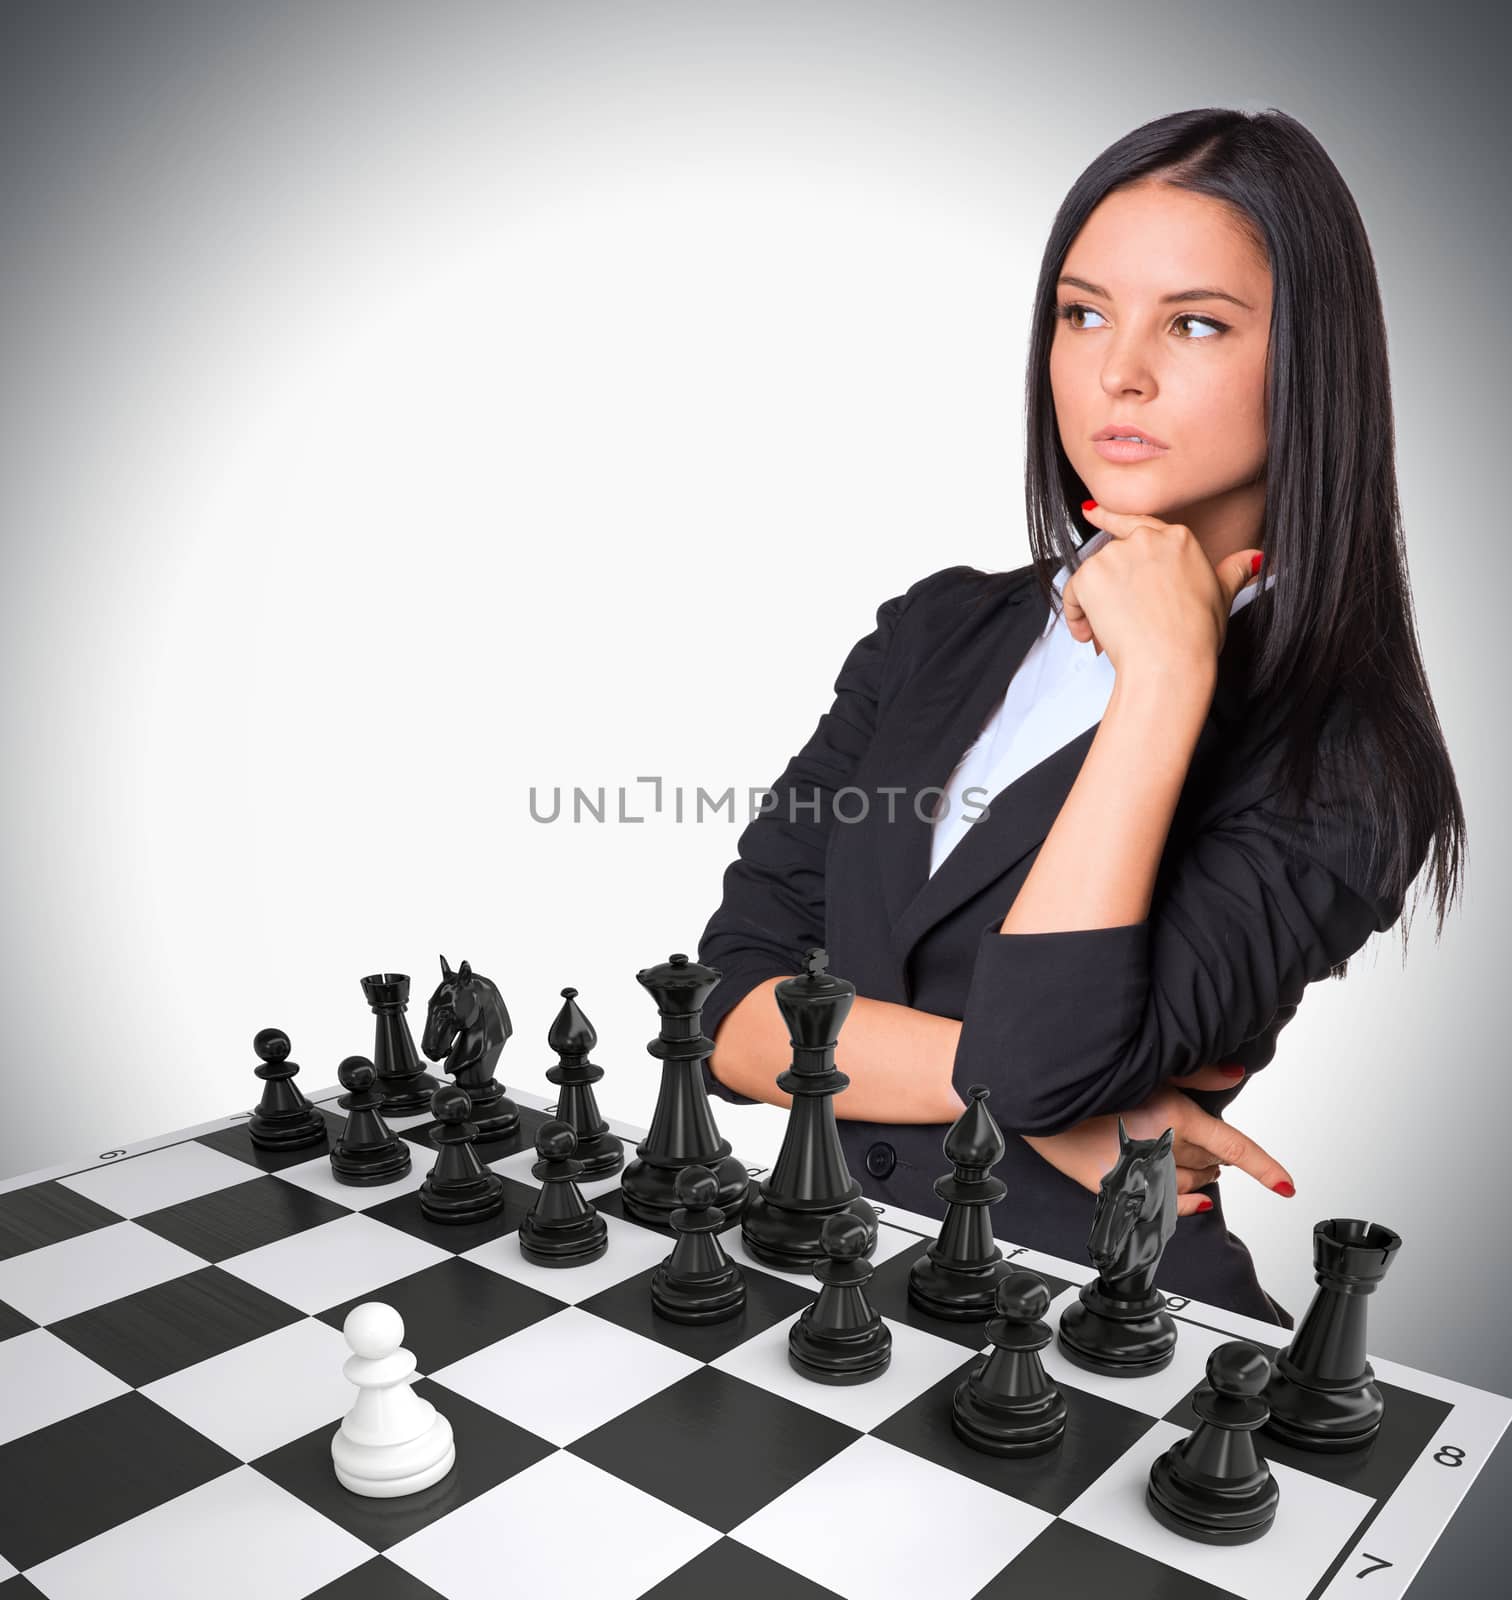 Lost in thought businesswoman looking up. Chessboard with chess. Gray background. Business concept